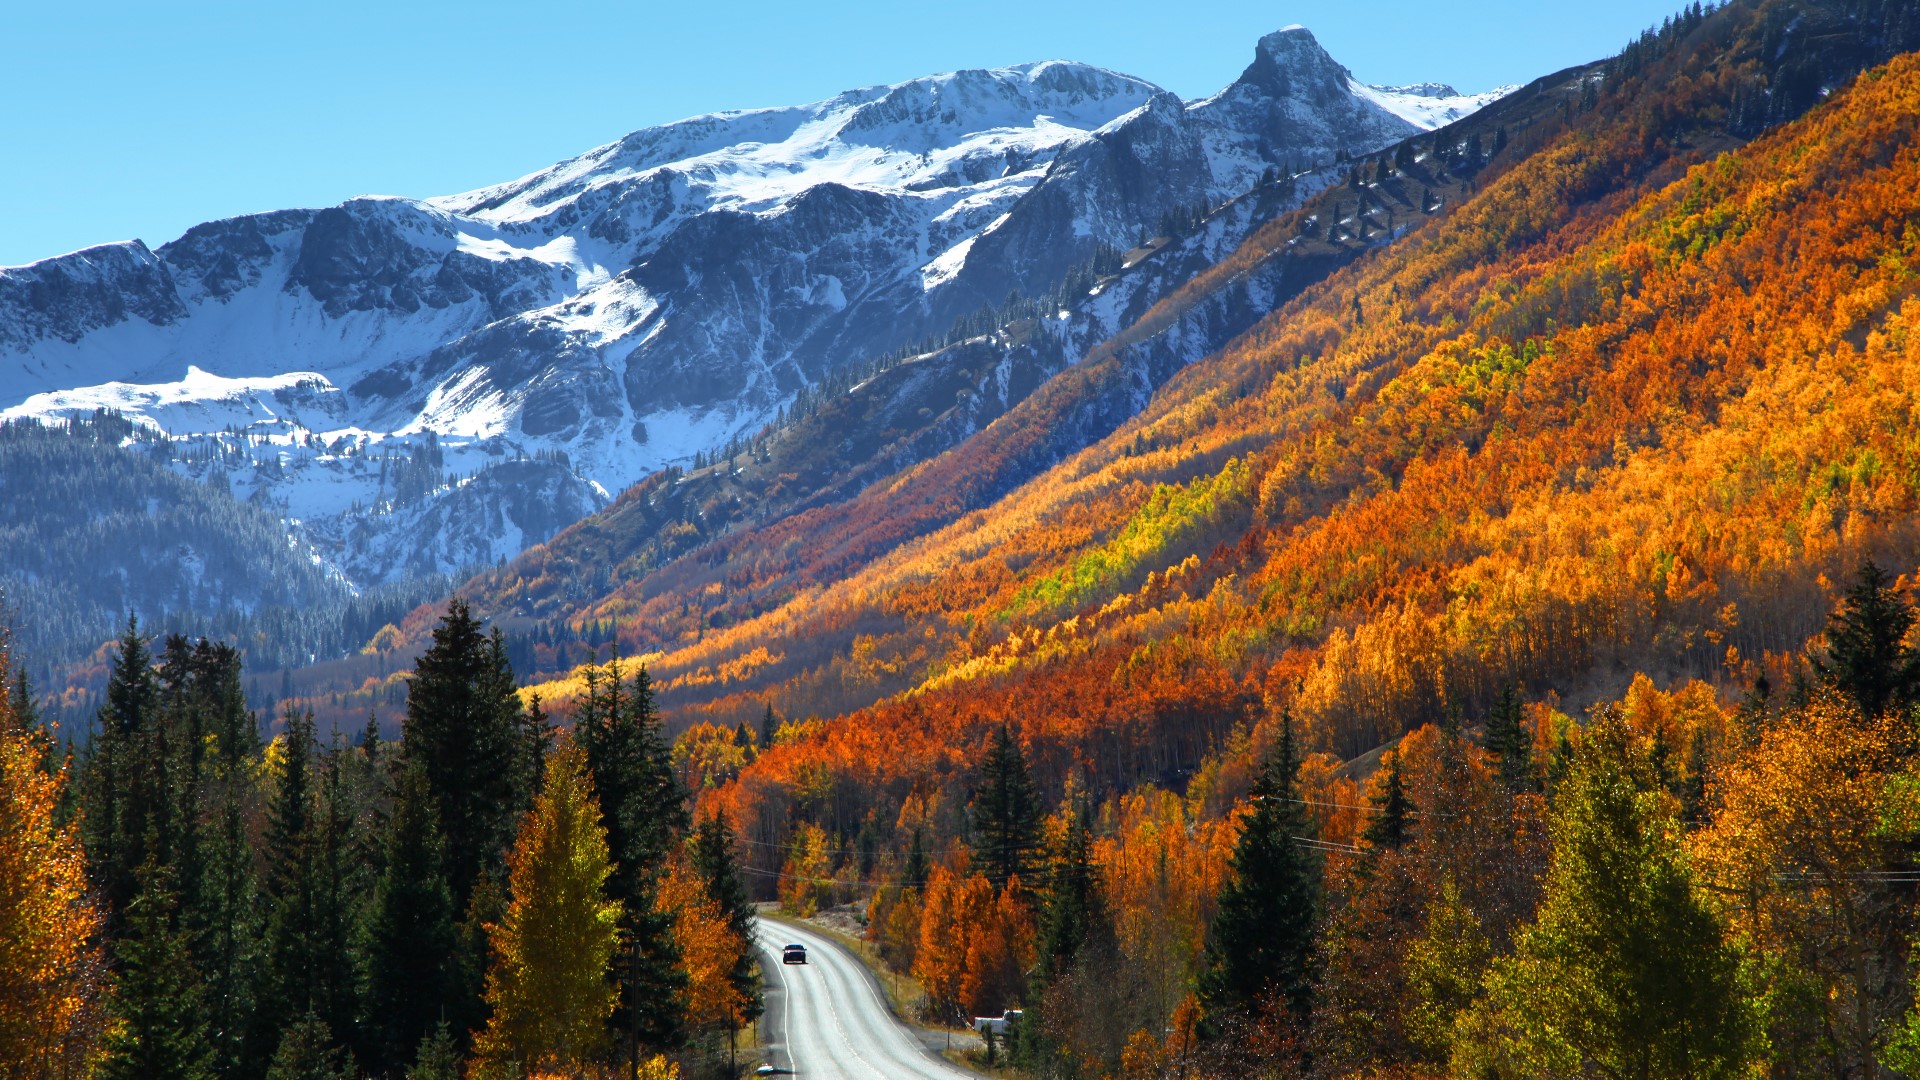 Fall is one of the best times in Colorado. If you're new to Colorado or if you're just looking for a new place to explore, this list is for you.